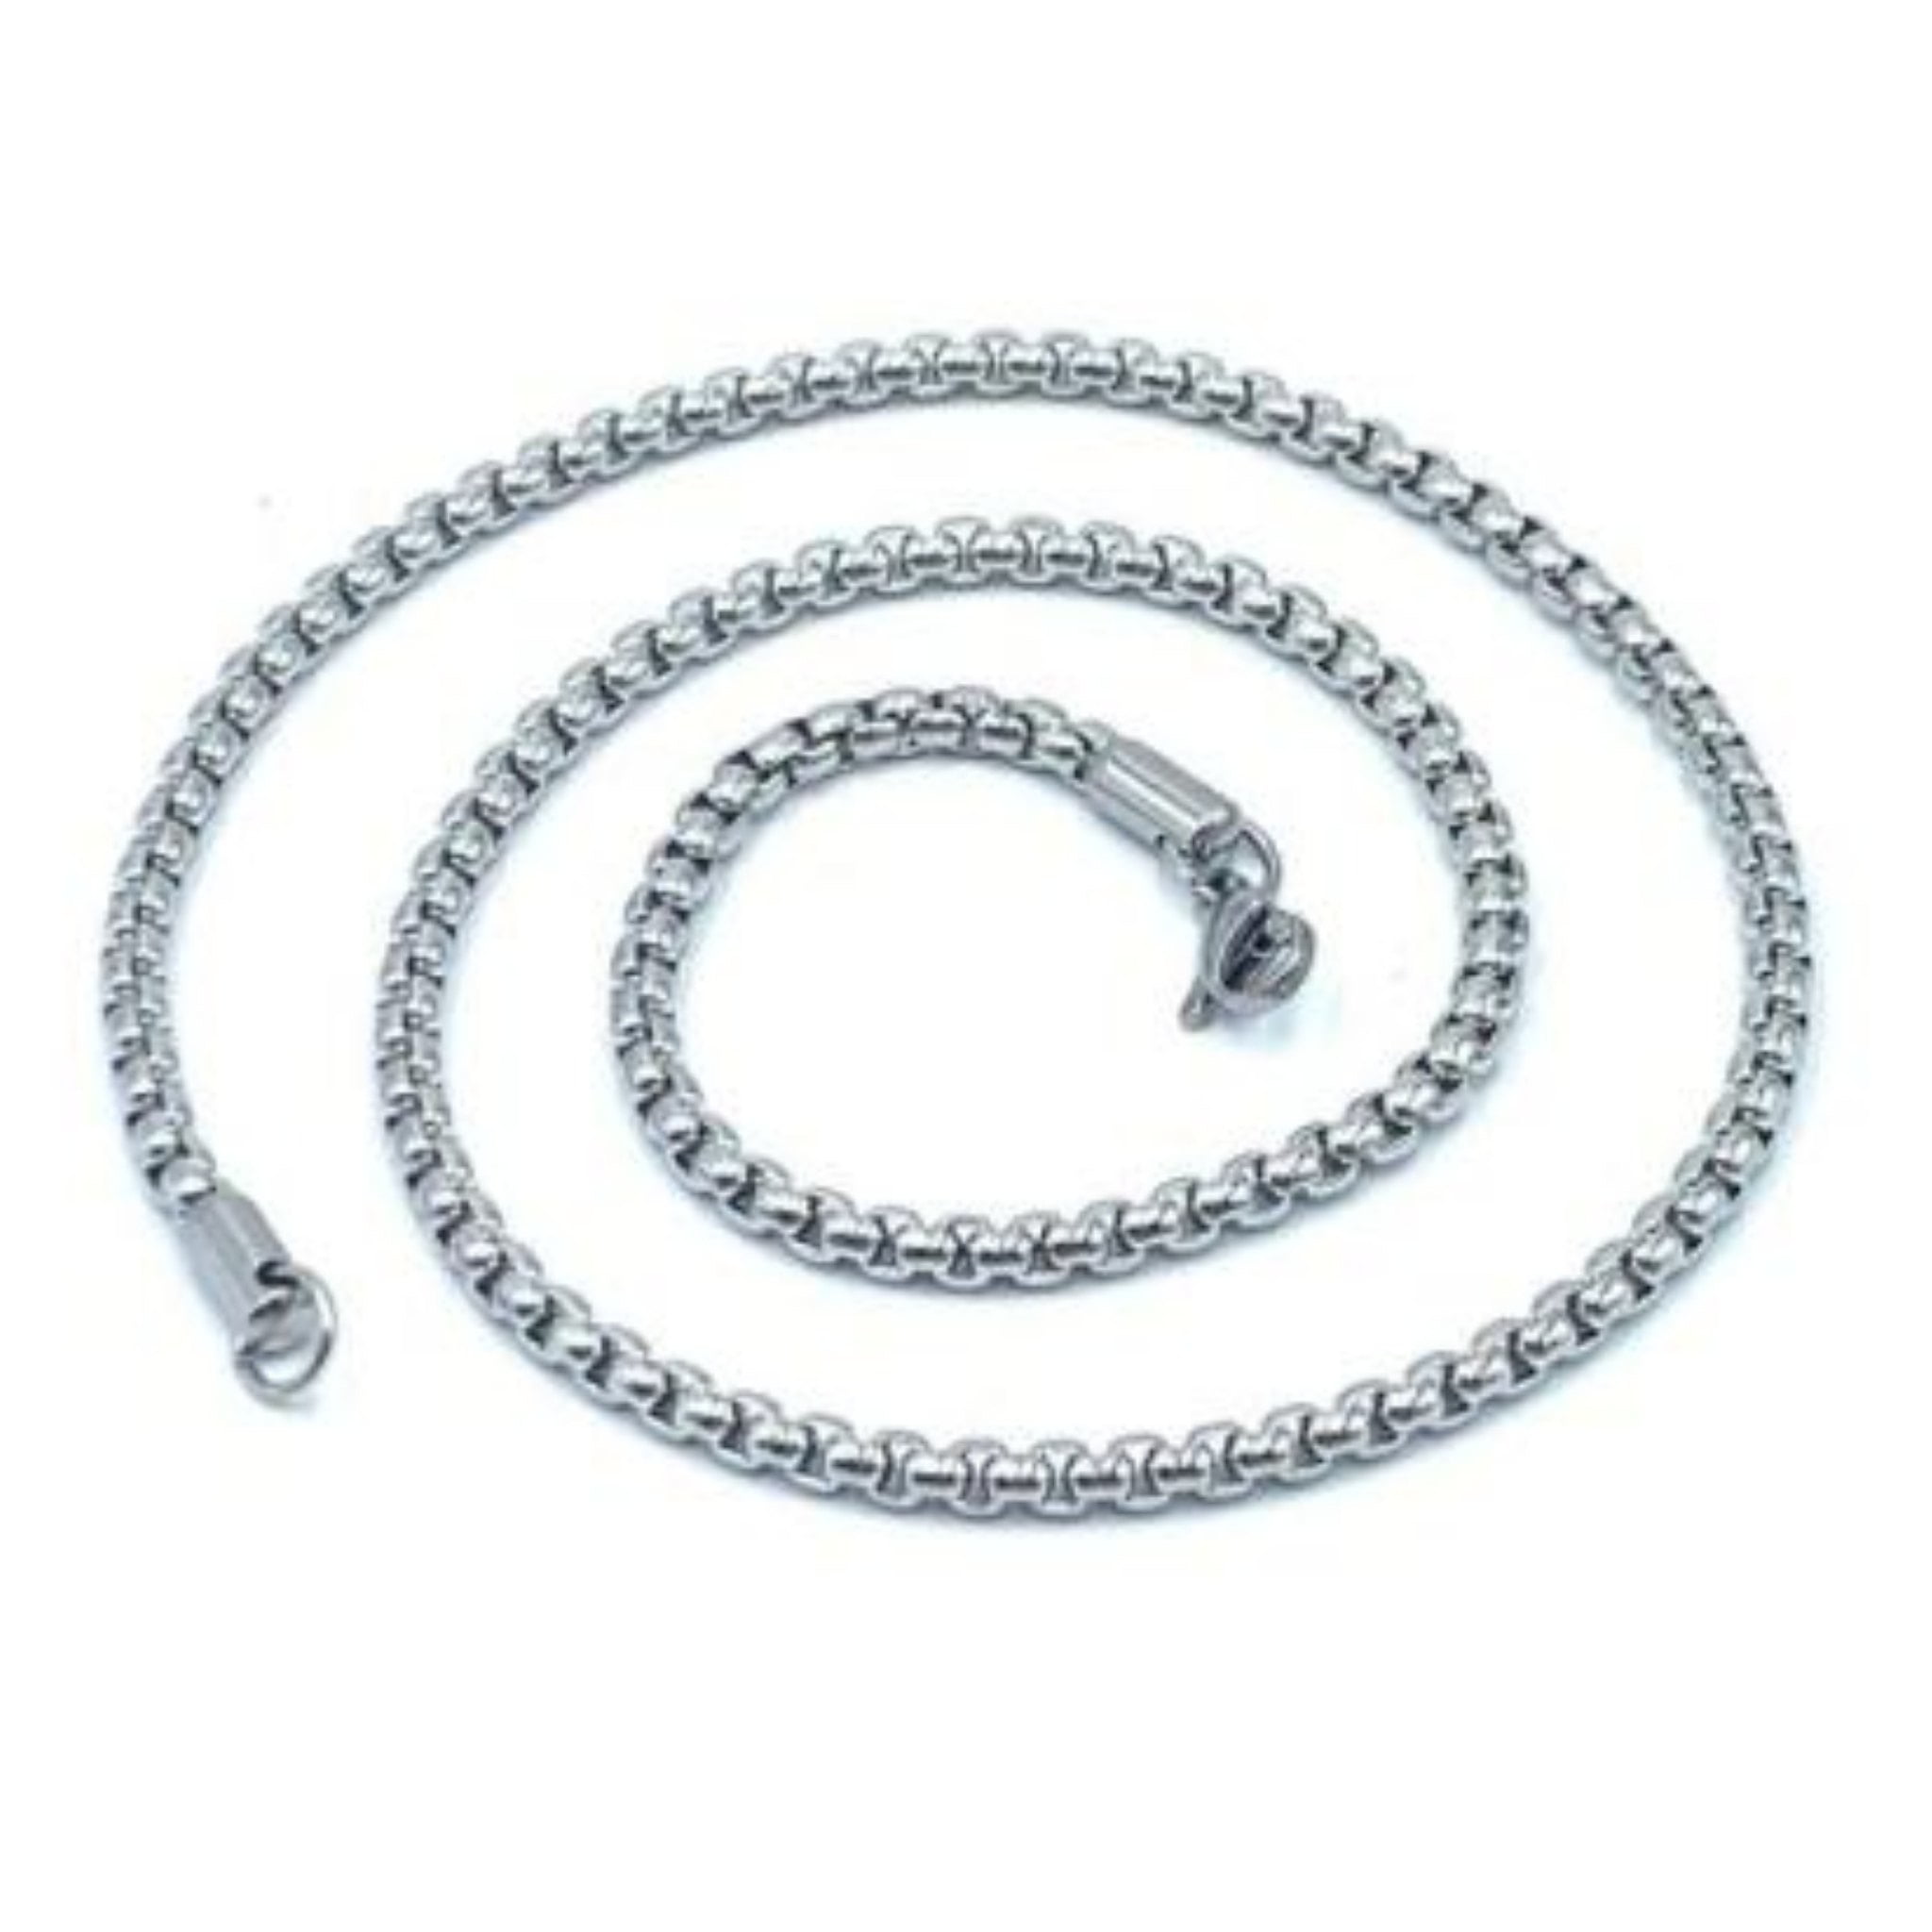 2/3/4mm Men Womens 316L Stainless Steel Silver Oval Link Chain Necklace Gift 